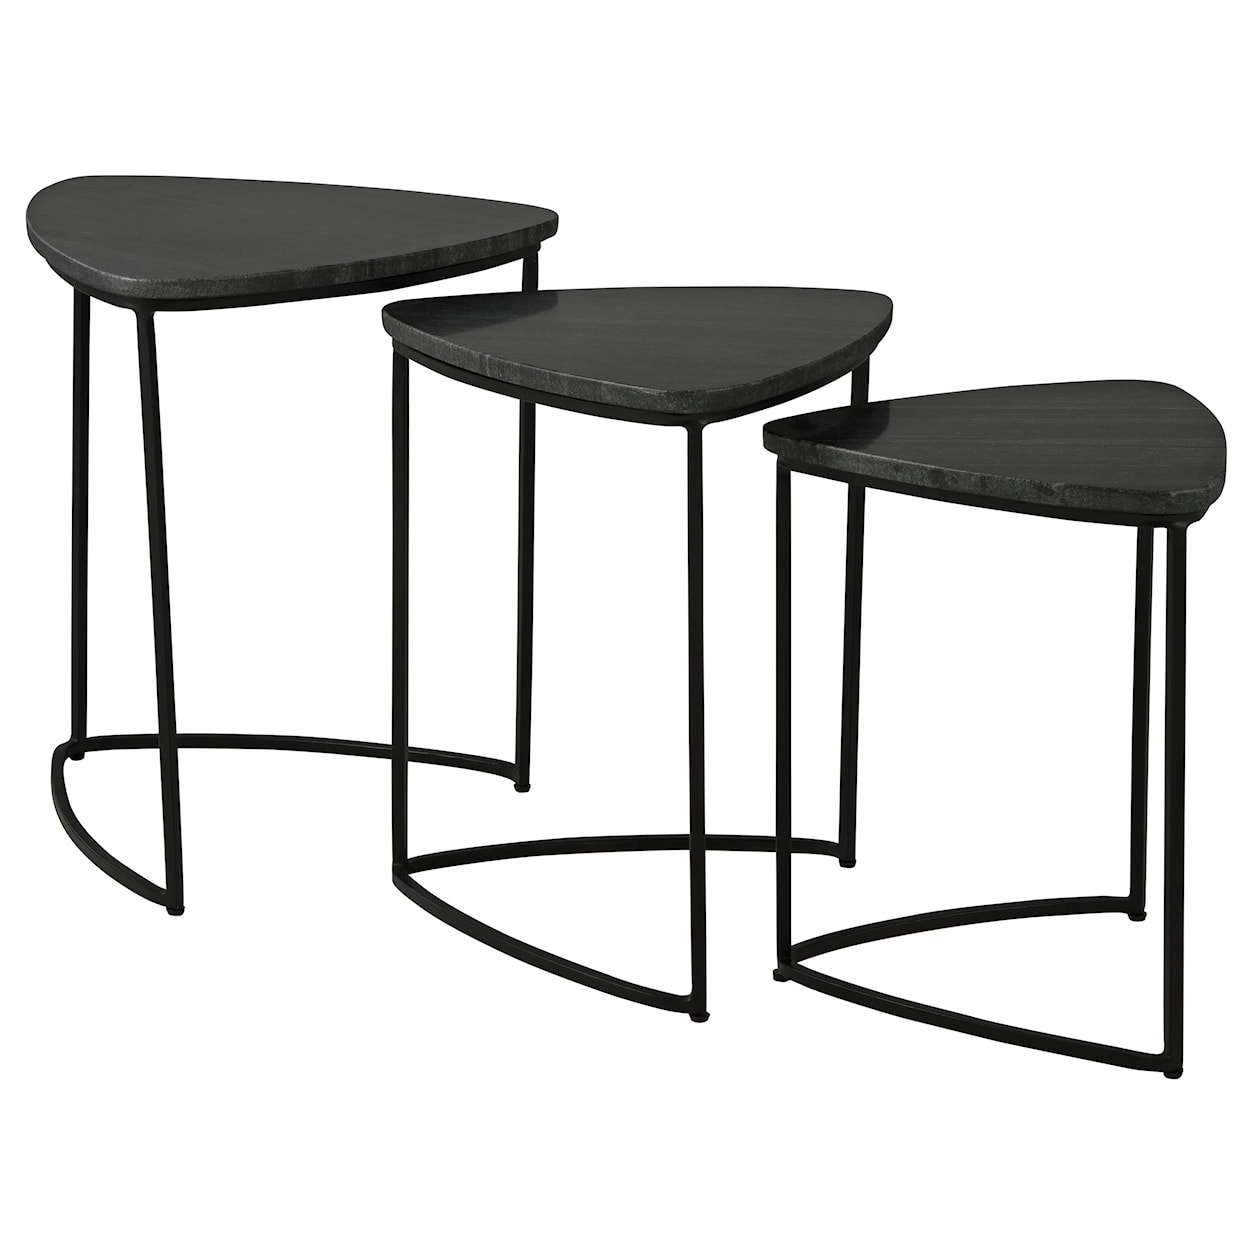 Signature Design by Ashley Furniture Olinmere Accent Table Set